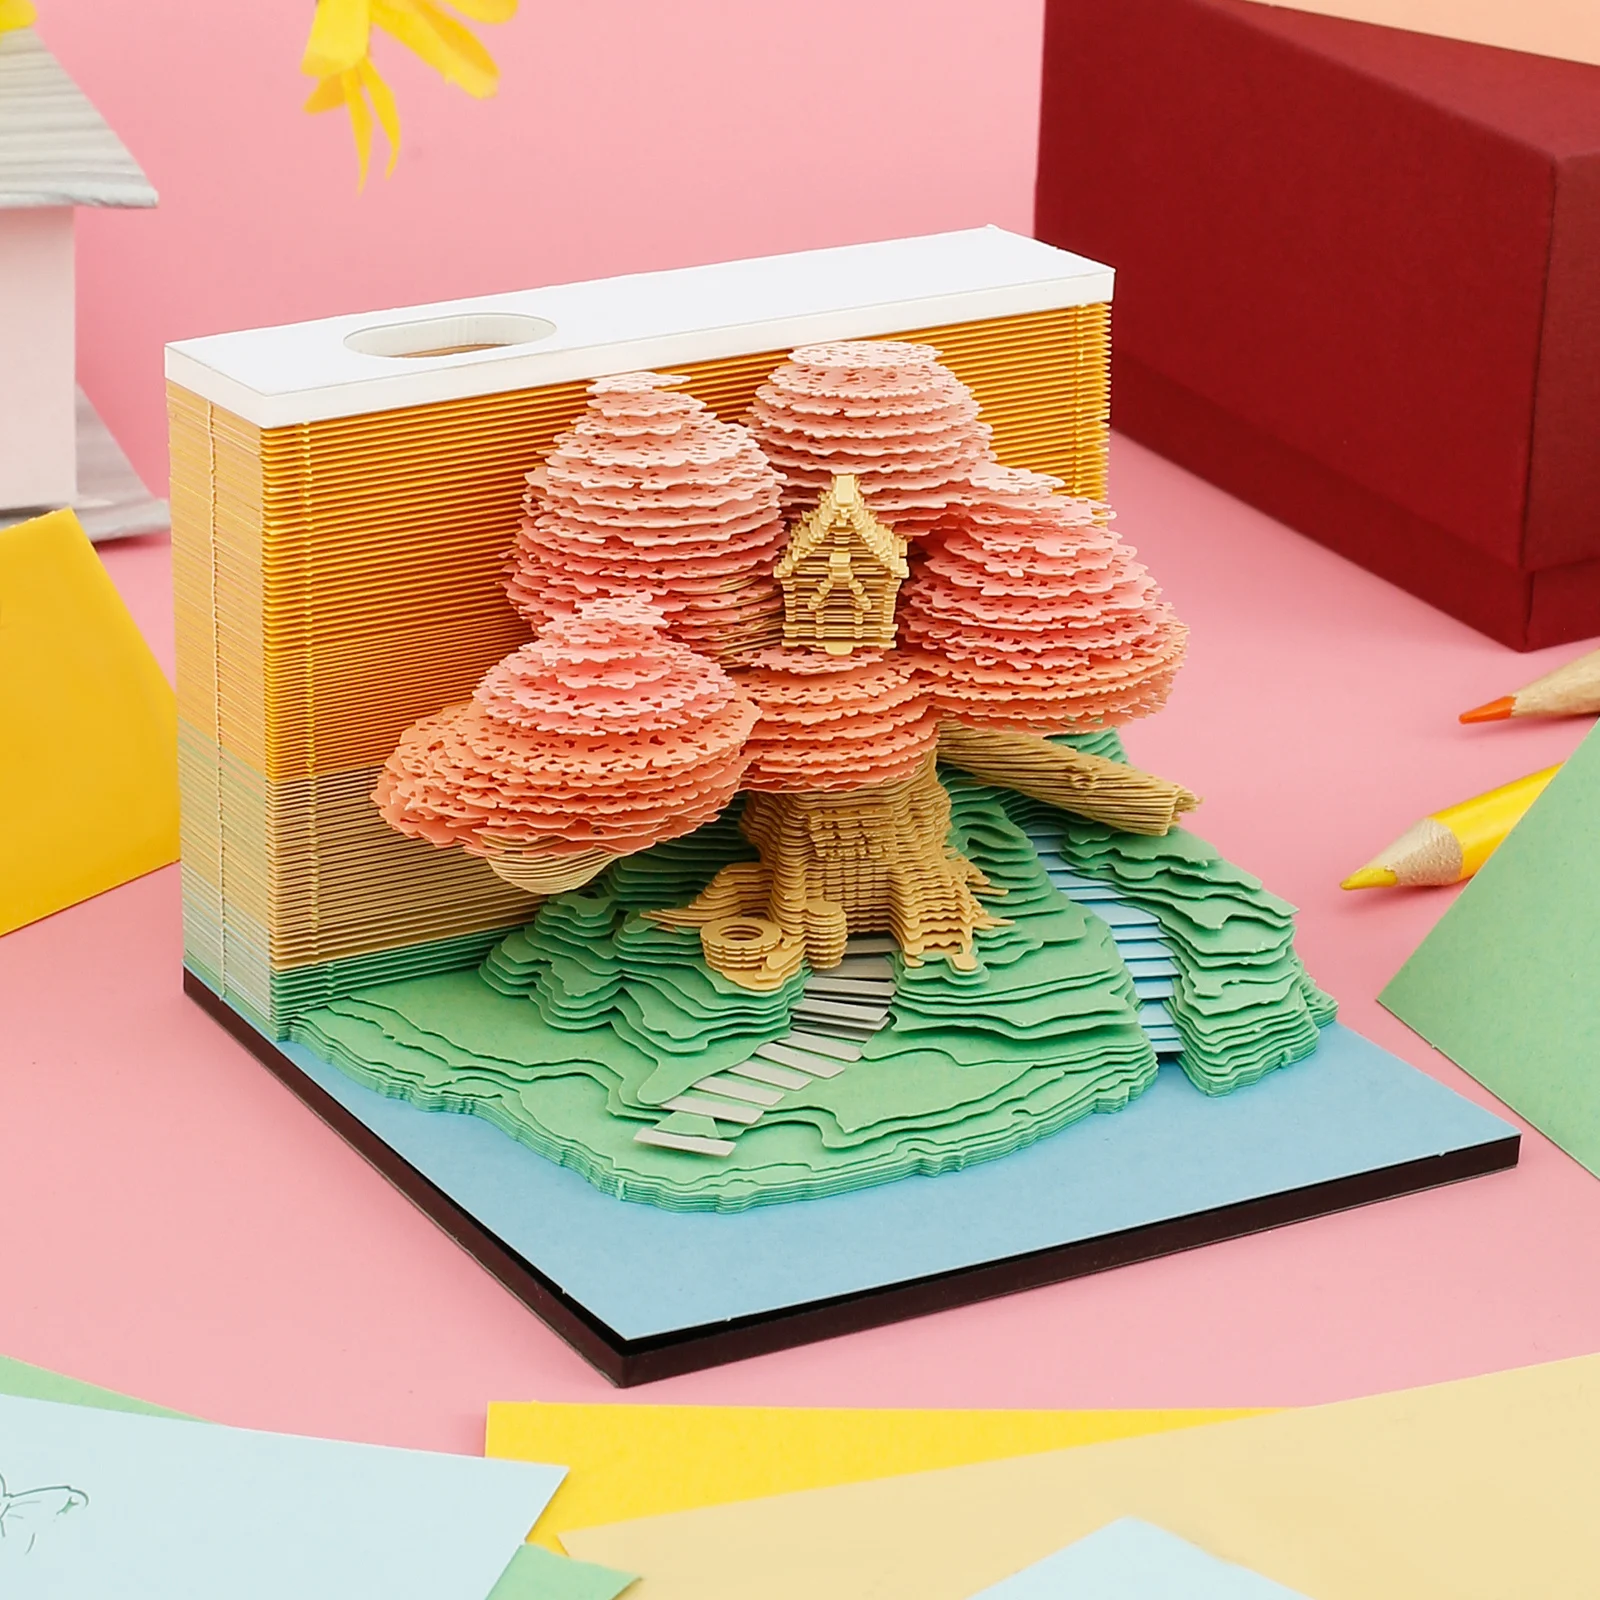 

New 3D Desk Note Pad 235 Pages Creative Tree House Memo Pad Tear-Away 3D Art Note Pad DIY 3D Memo Pad Paper Carving Art for Home